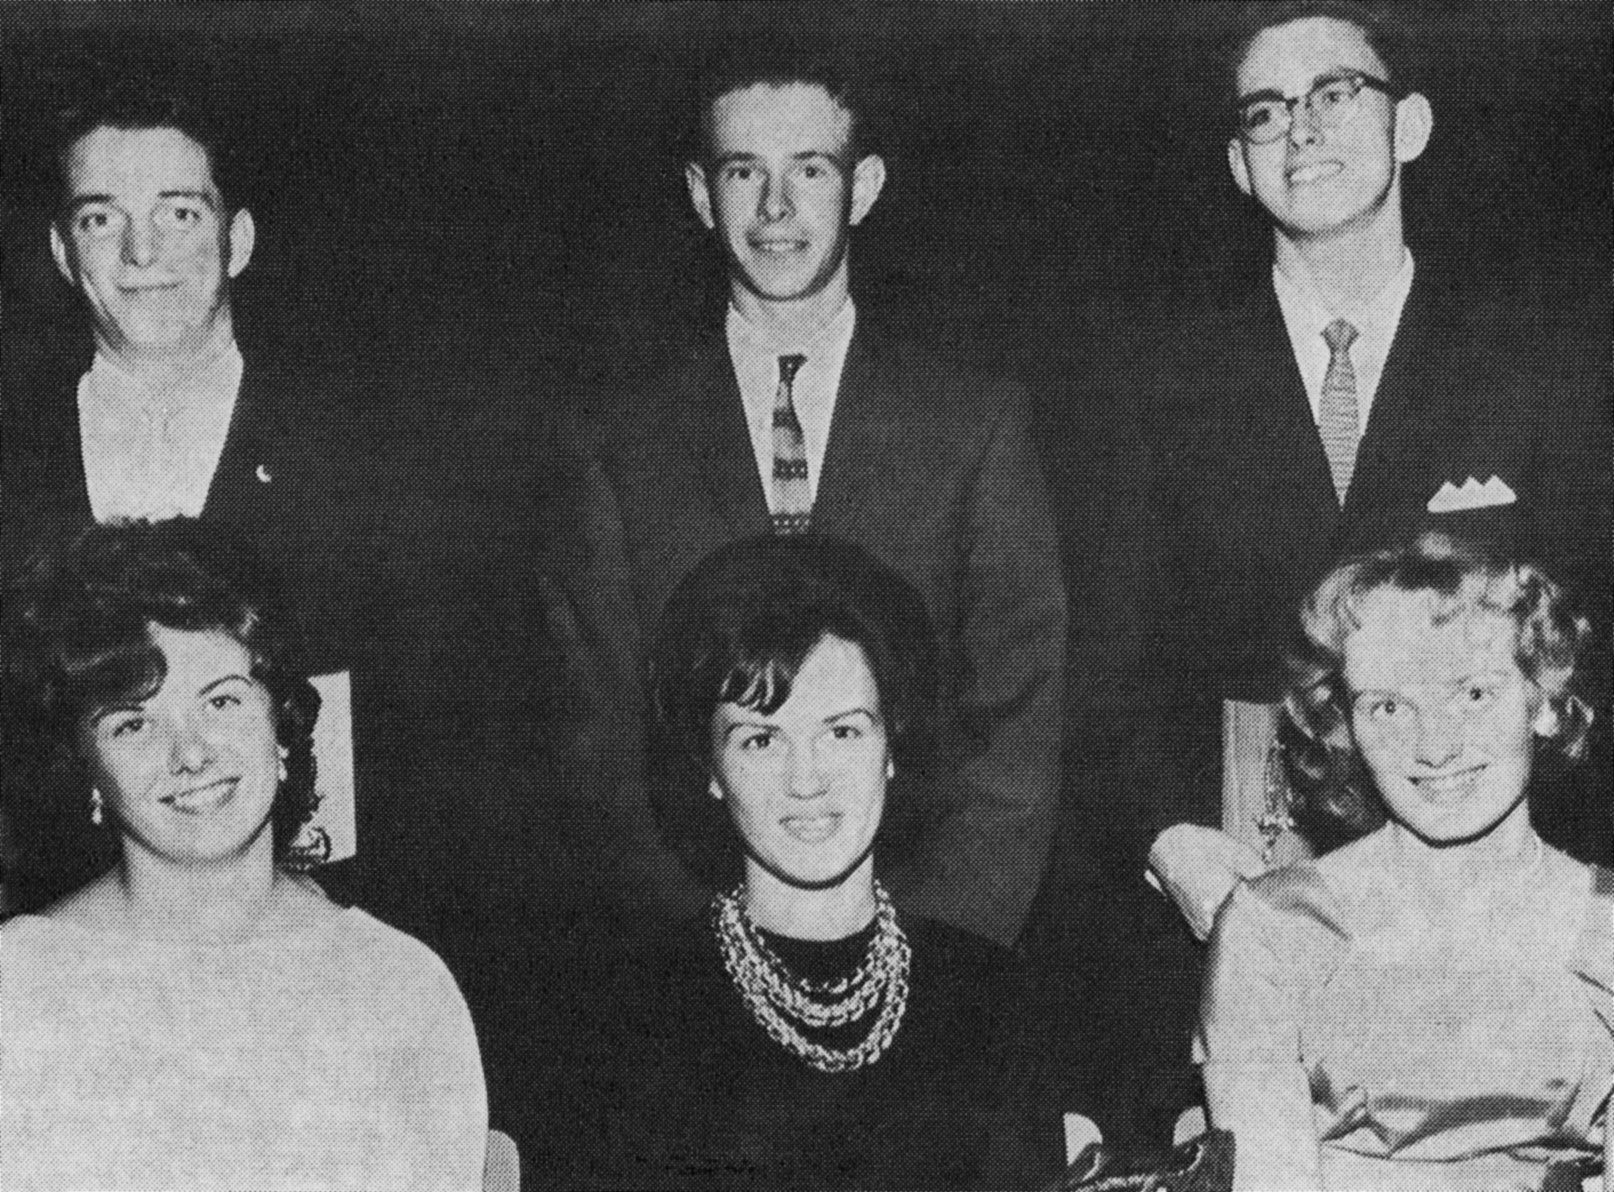 (Click to magnify) FRONT ROW: Marion Clark, Gail Bagshaw, Peggy Hickling; BACK ROW: Lawrie Taylor, Alvin Clark, James McDowell; ABSENT: Ann Martens